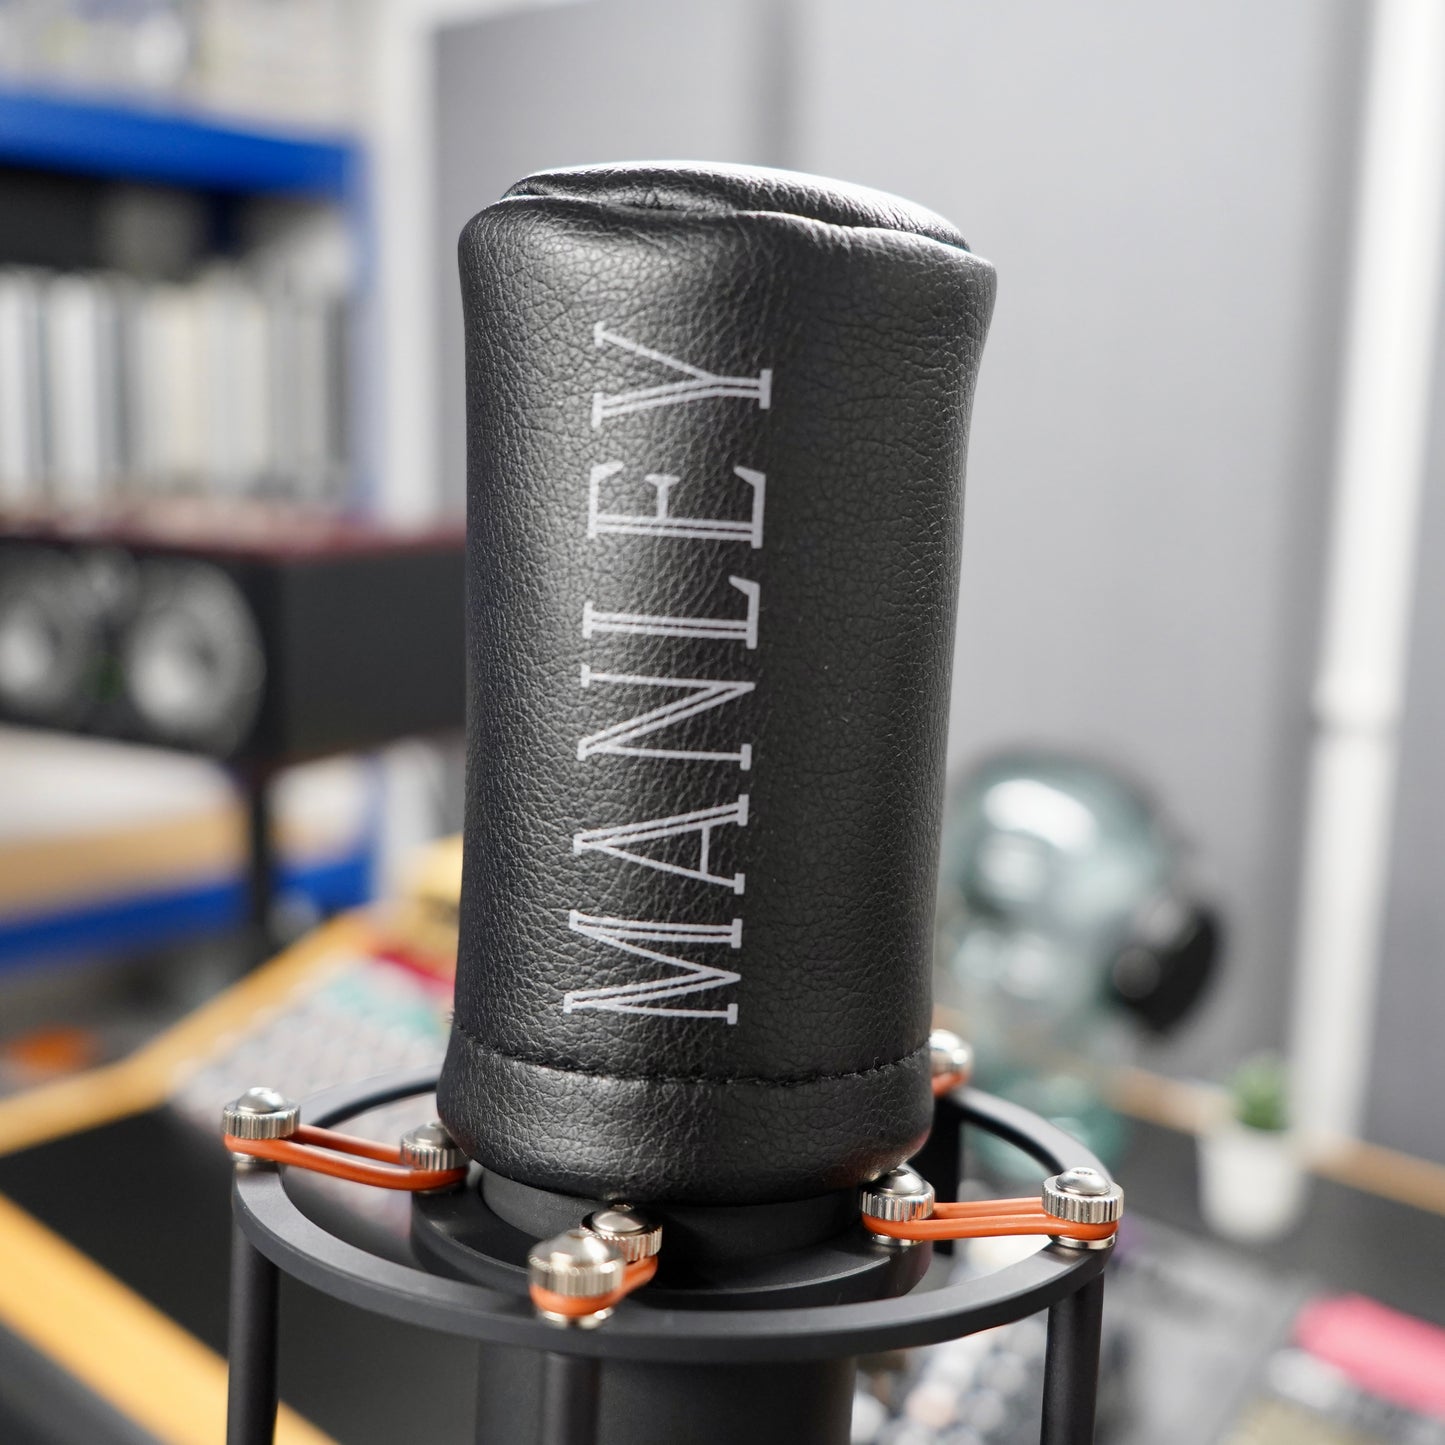 Manley Reference Cardioid Tube Microphone